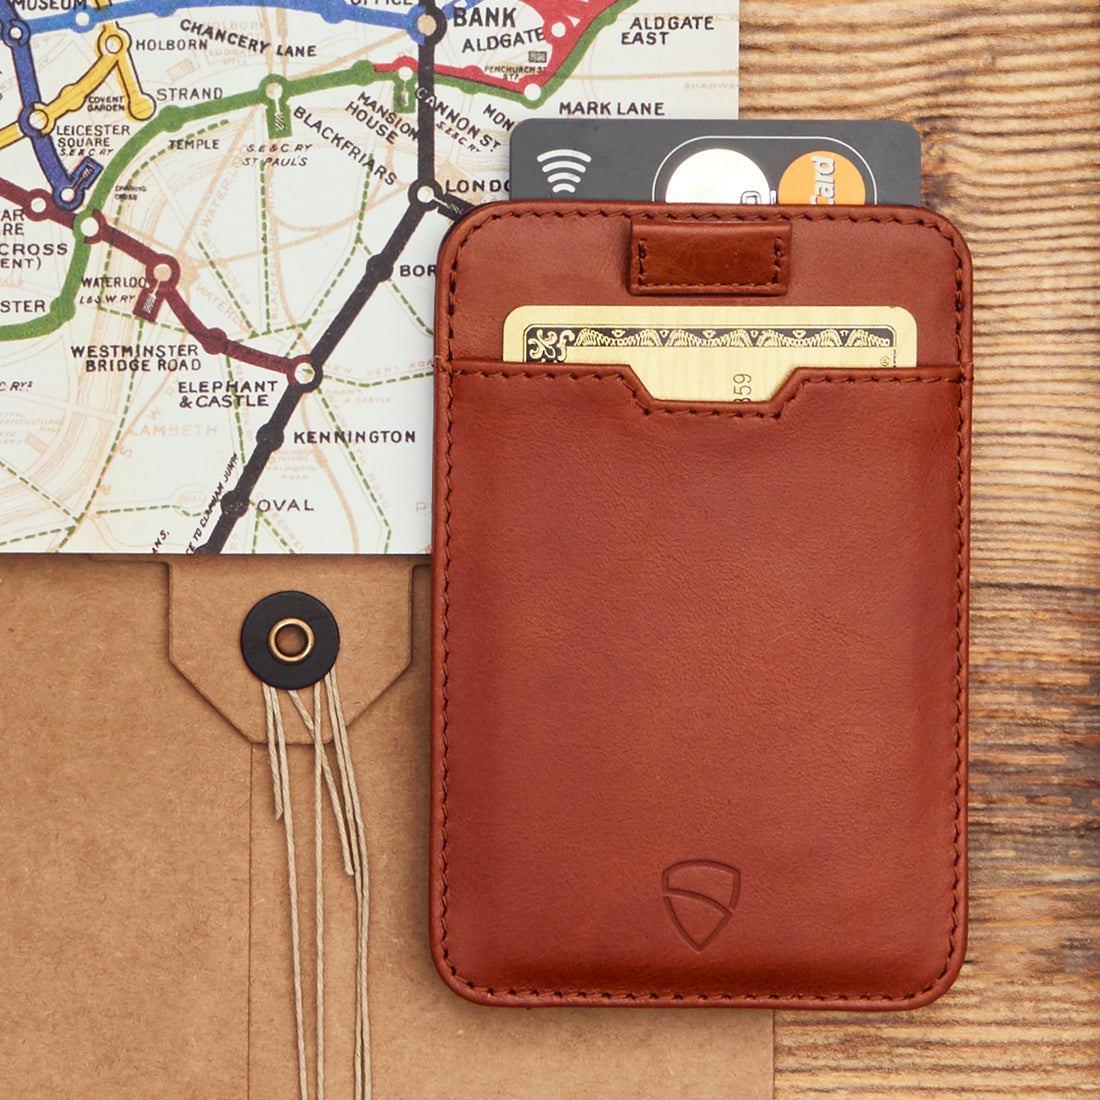 VAULTSKIN Chelsea minimalist RFID protected leather wallet in cognac lies in front of a map and envelope